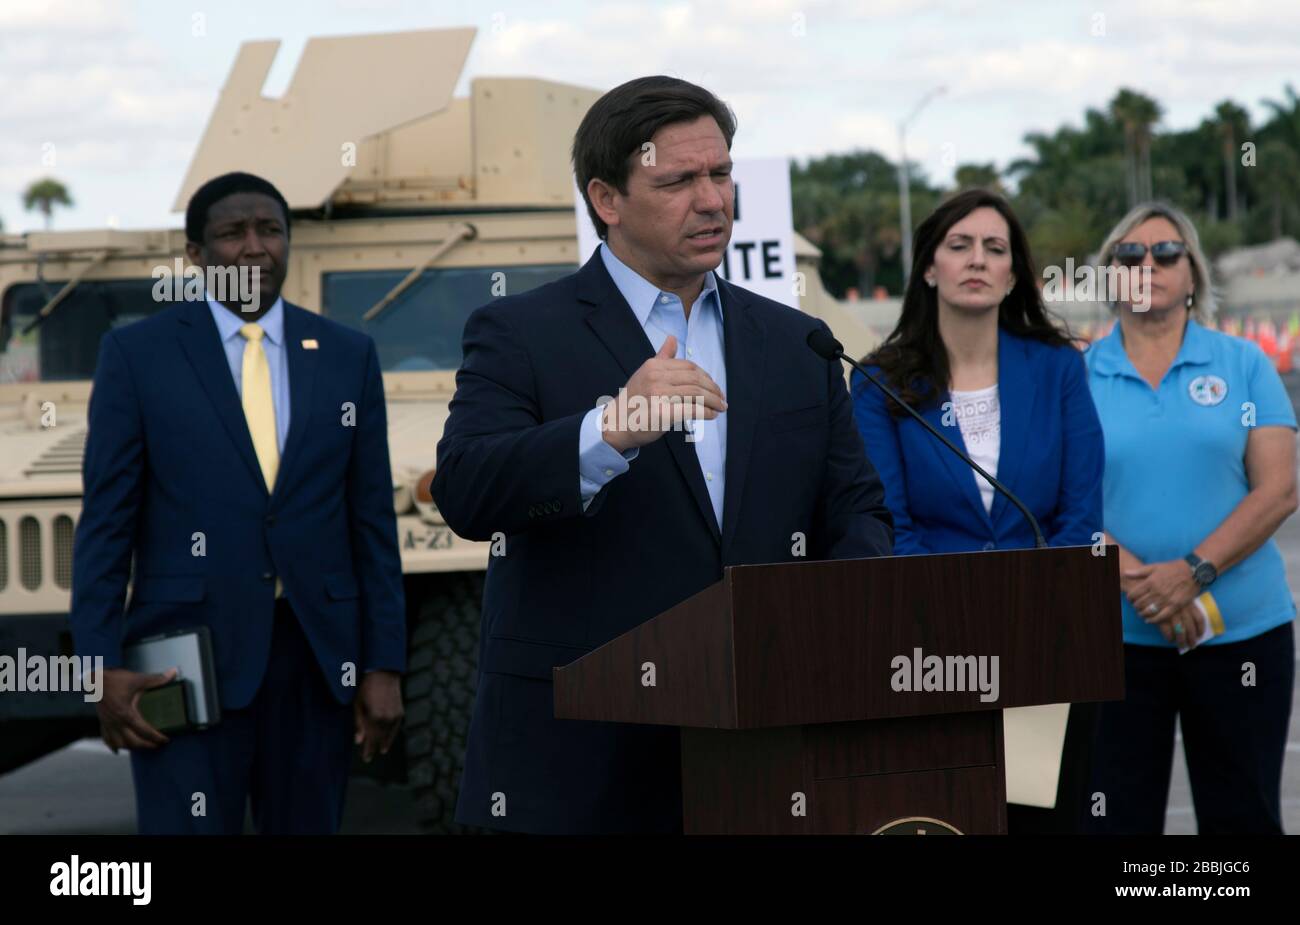 Florida Gov. Ron DeSantis holds a press conference at a Community Based COVID-19, coronavirus testing site at the Hard Rock Stadium March 30, 2020 in Miami Gardens, Florida. DeSantis has been criticized for his slow response to the pandemic and failure to impose strict guidelines on social distancing to prevent the spread of the virus. Stock Photo